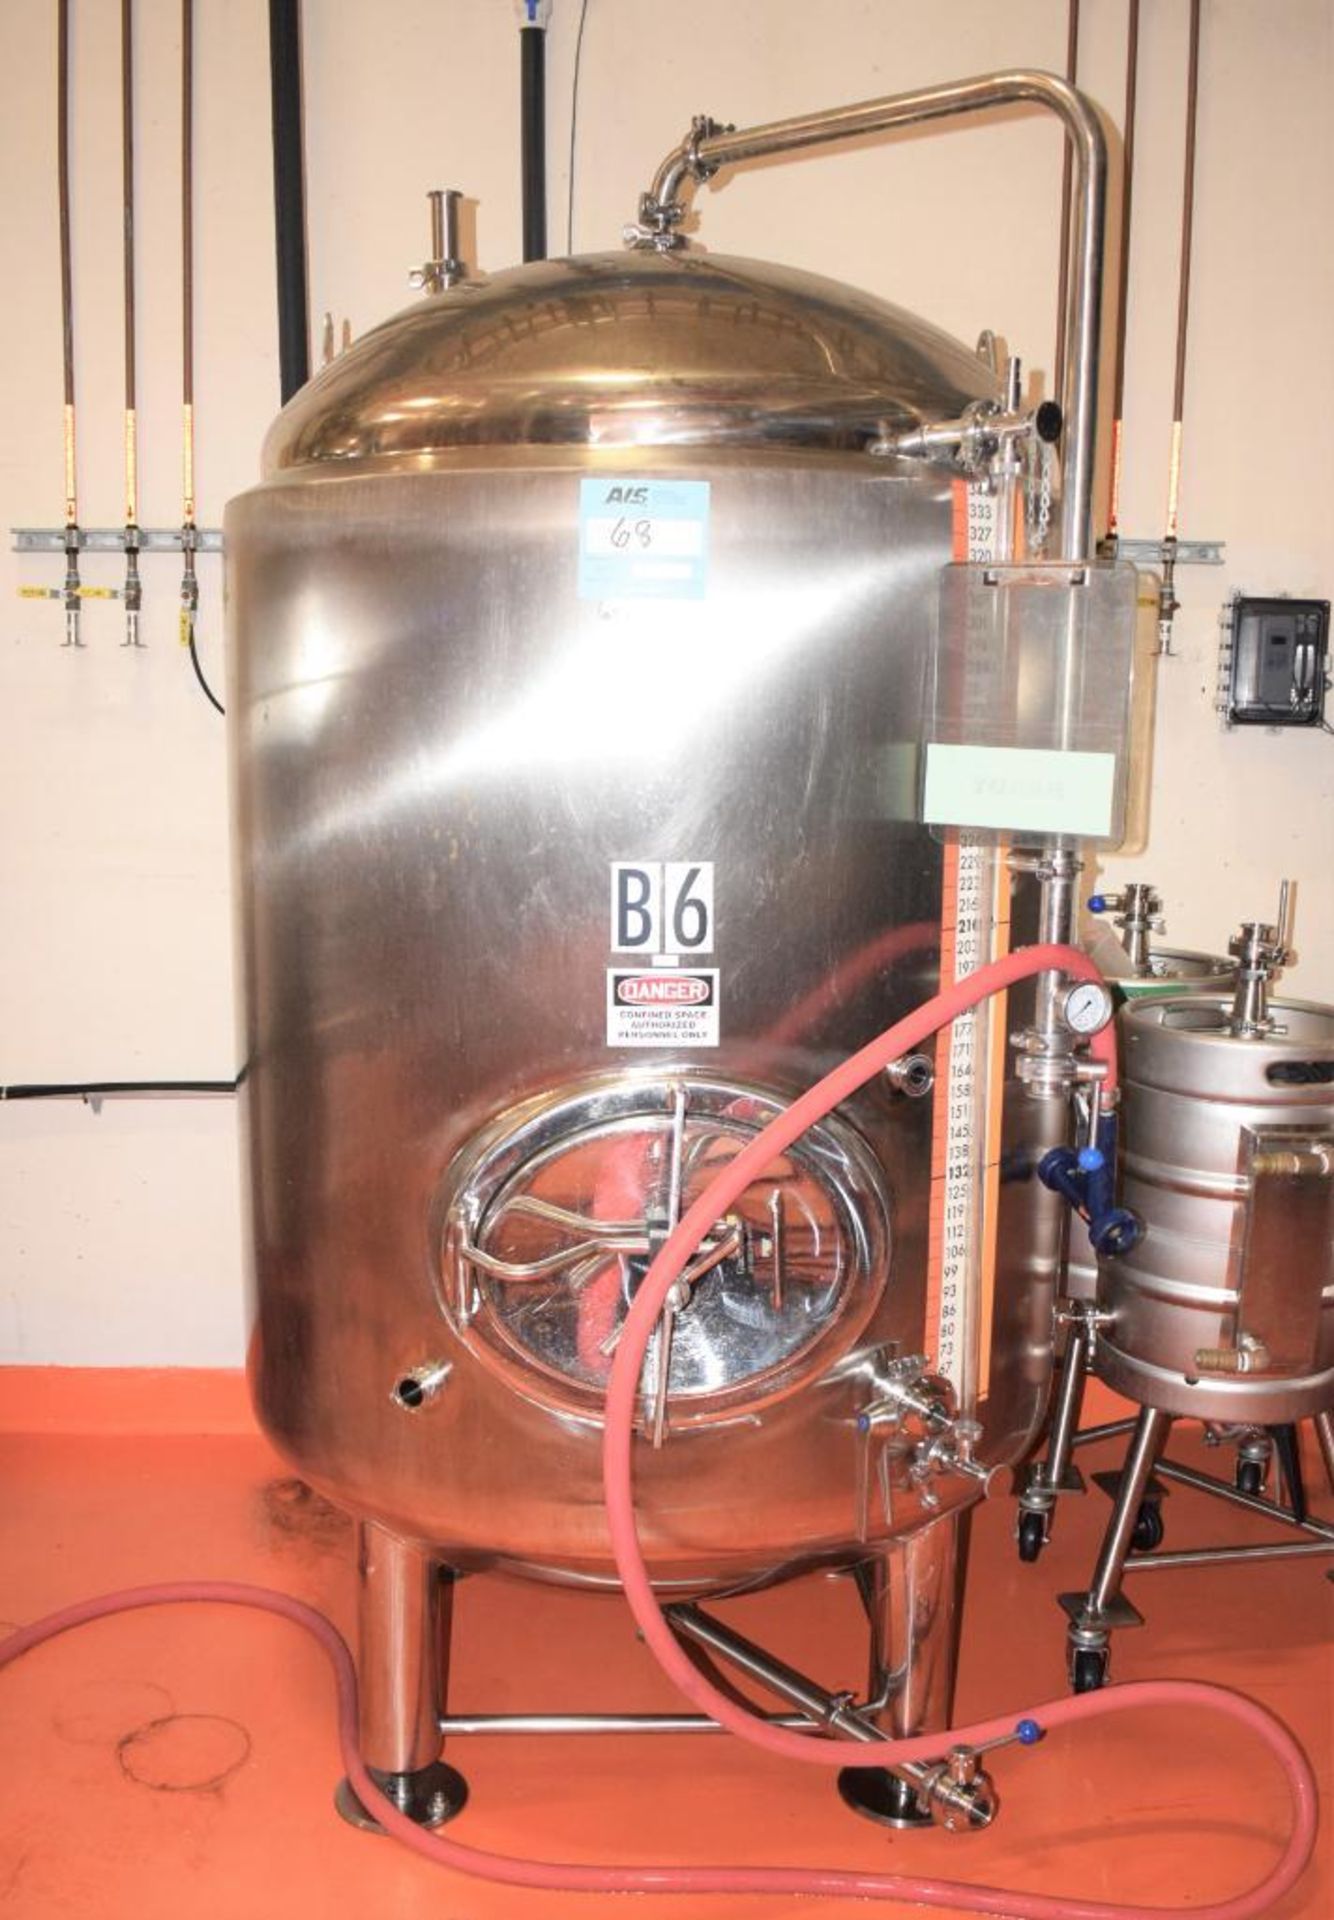 Glacier Jacketed Tank, Approximate 350 Gallon (10 BBL), Stainless Steel. Approximate 43.3 diameter x - Image 2 of 7